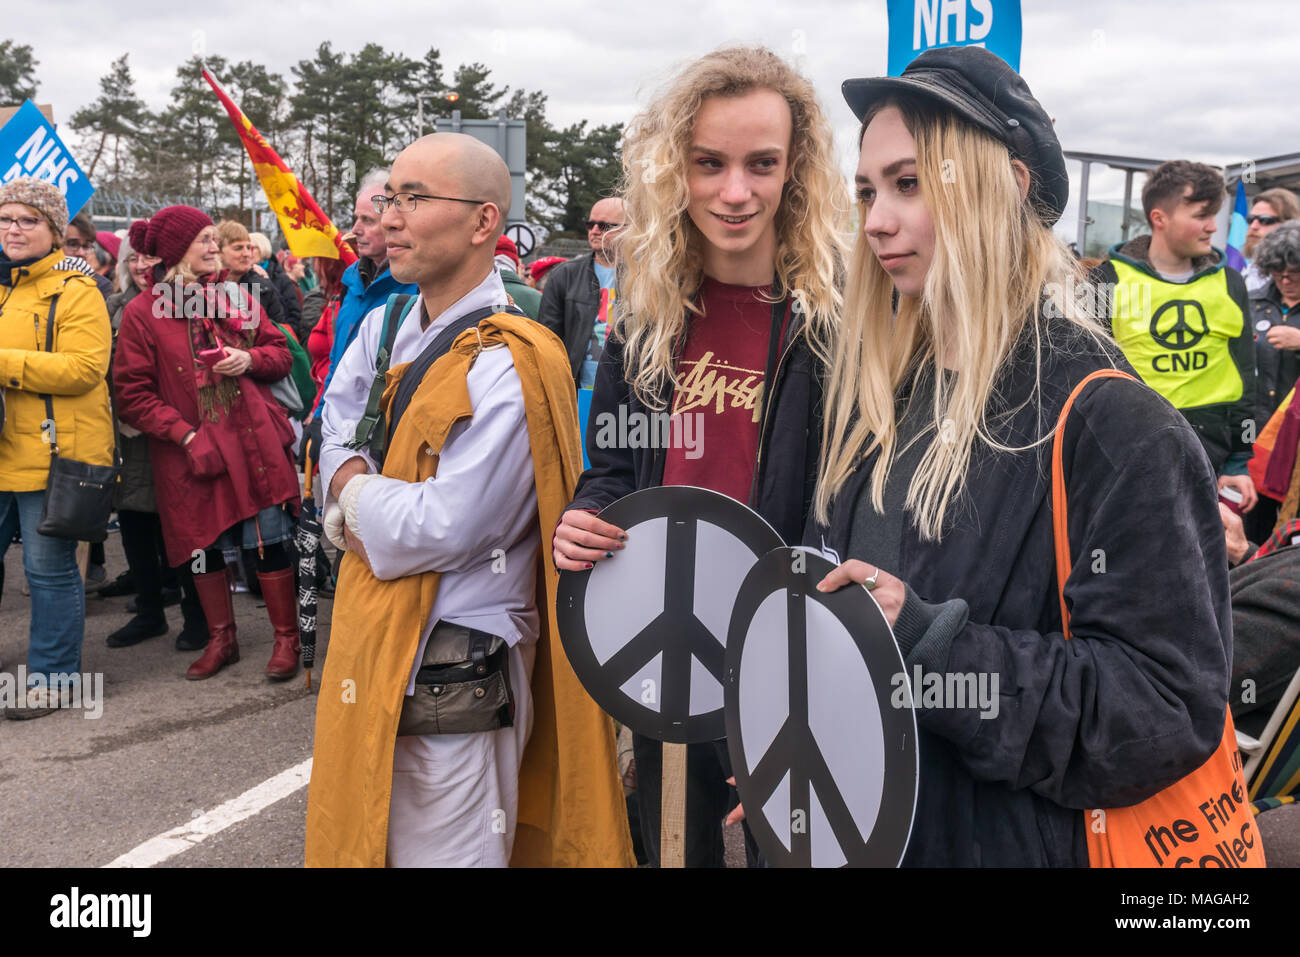 Aldermaston, UK. 1st Apr, 2018. People in the crowd as CND celebrates the 60th anniversary of the first Aldermaston march which mobilised thousands against the Bomb and shaped radical protest for generations. Their protest outside the Atomic Weapons Establishment included a giant, iconic peace symbol, speeches, including by some of those on the original march, singing and drumming and celebrated the UN treaty banning nuclear weapons. Campaign to abolish nuclear weapons. Credit: Peter Marshall/Alamy Live News Stock Photo